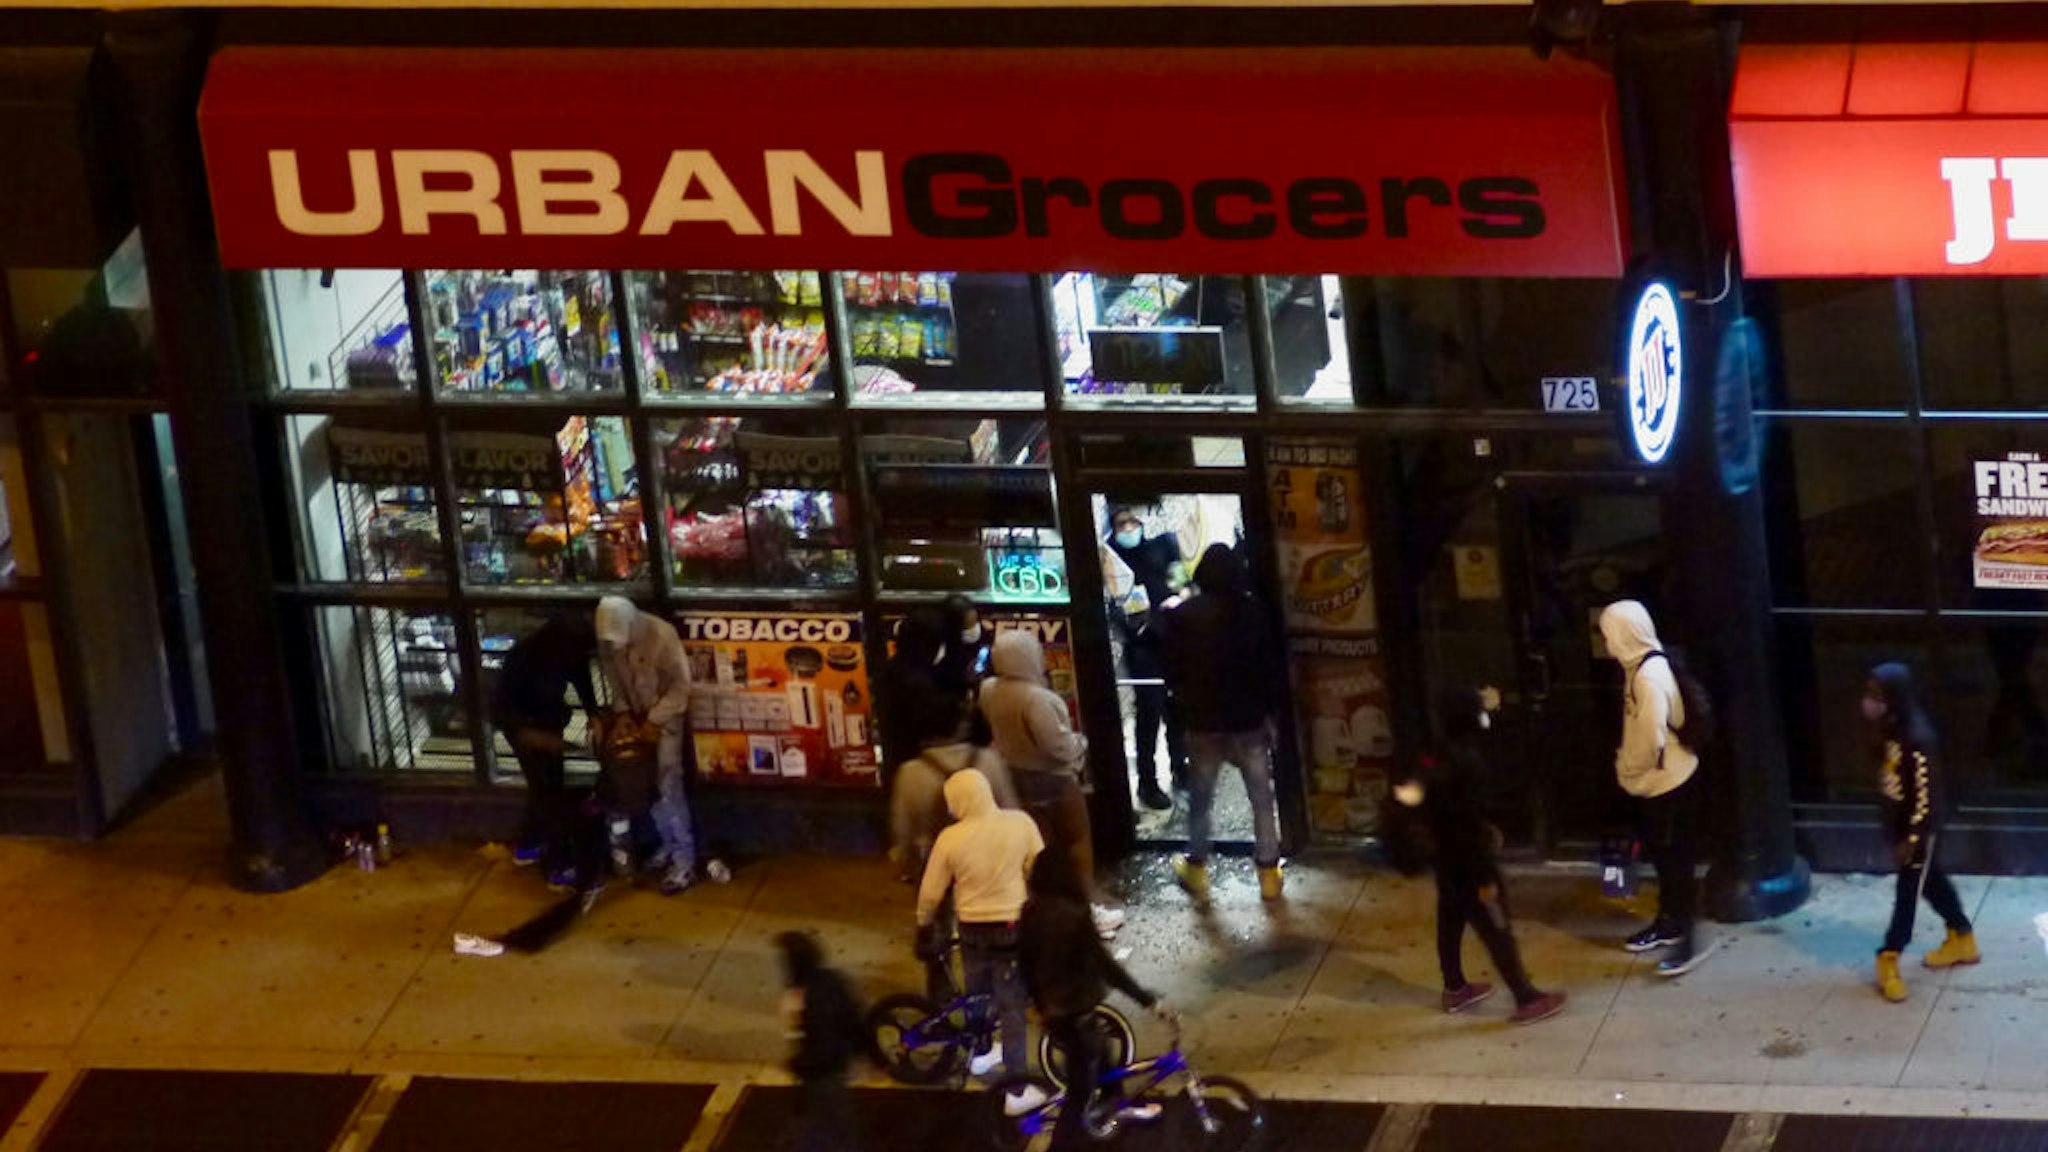 Looters enter a store during protests against the death of George Floyd, in the South Loop of Chicago, Illinois, May 31, 2020.